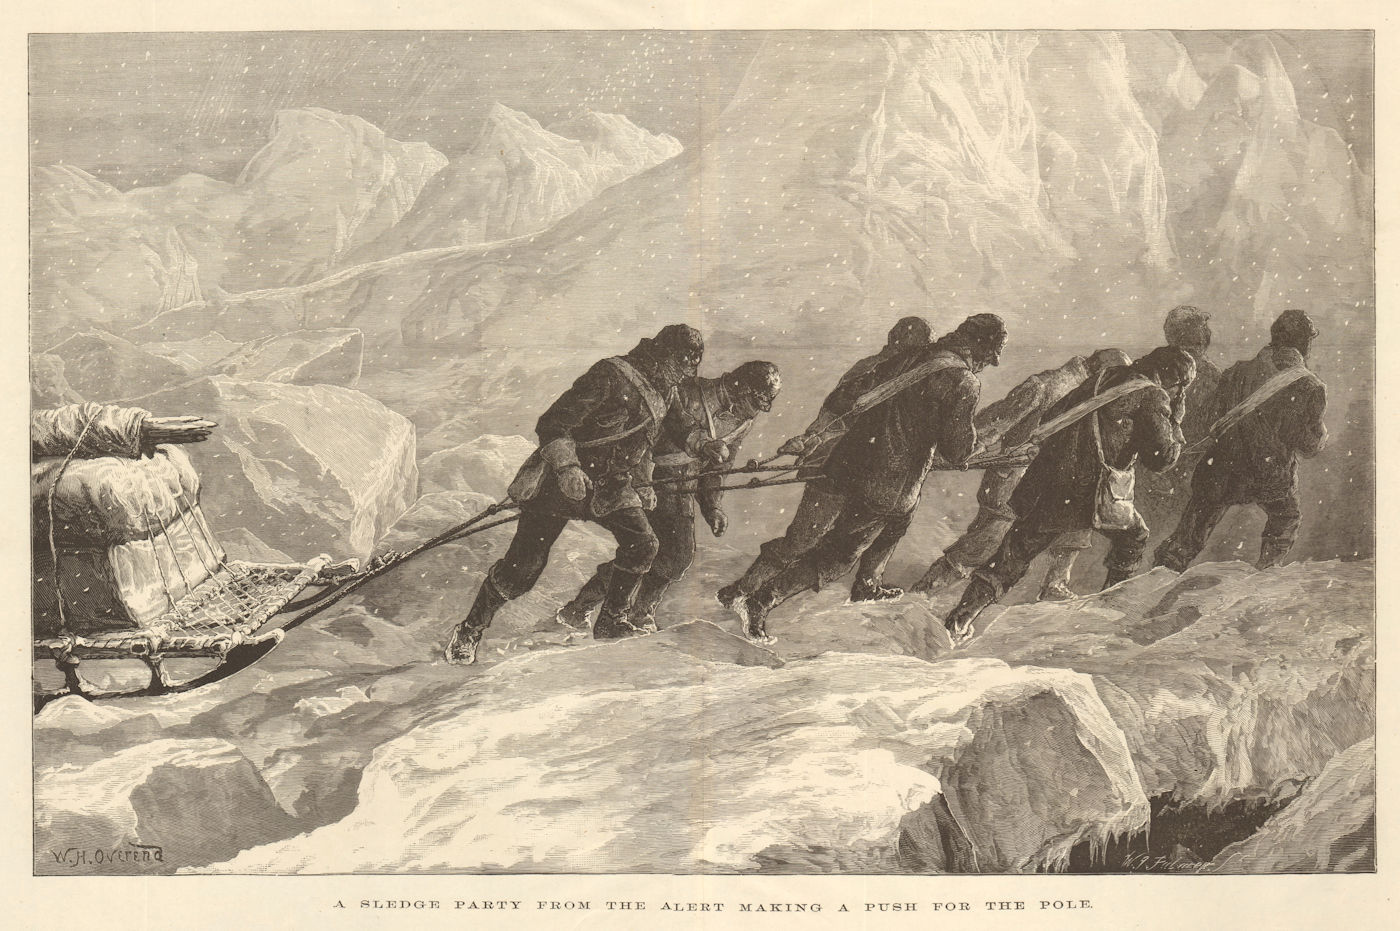 Arctic Expedition: the Alert's sledge party heading for the North Pole 1876